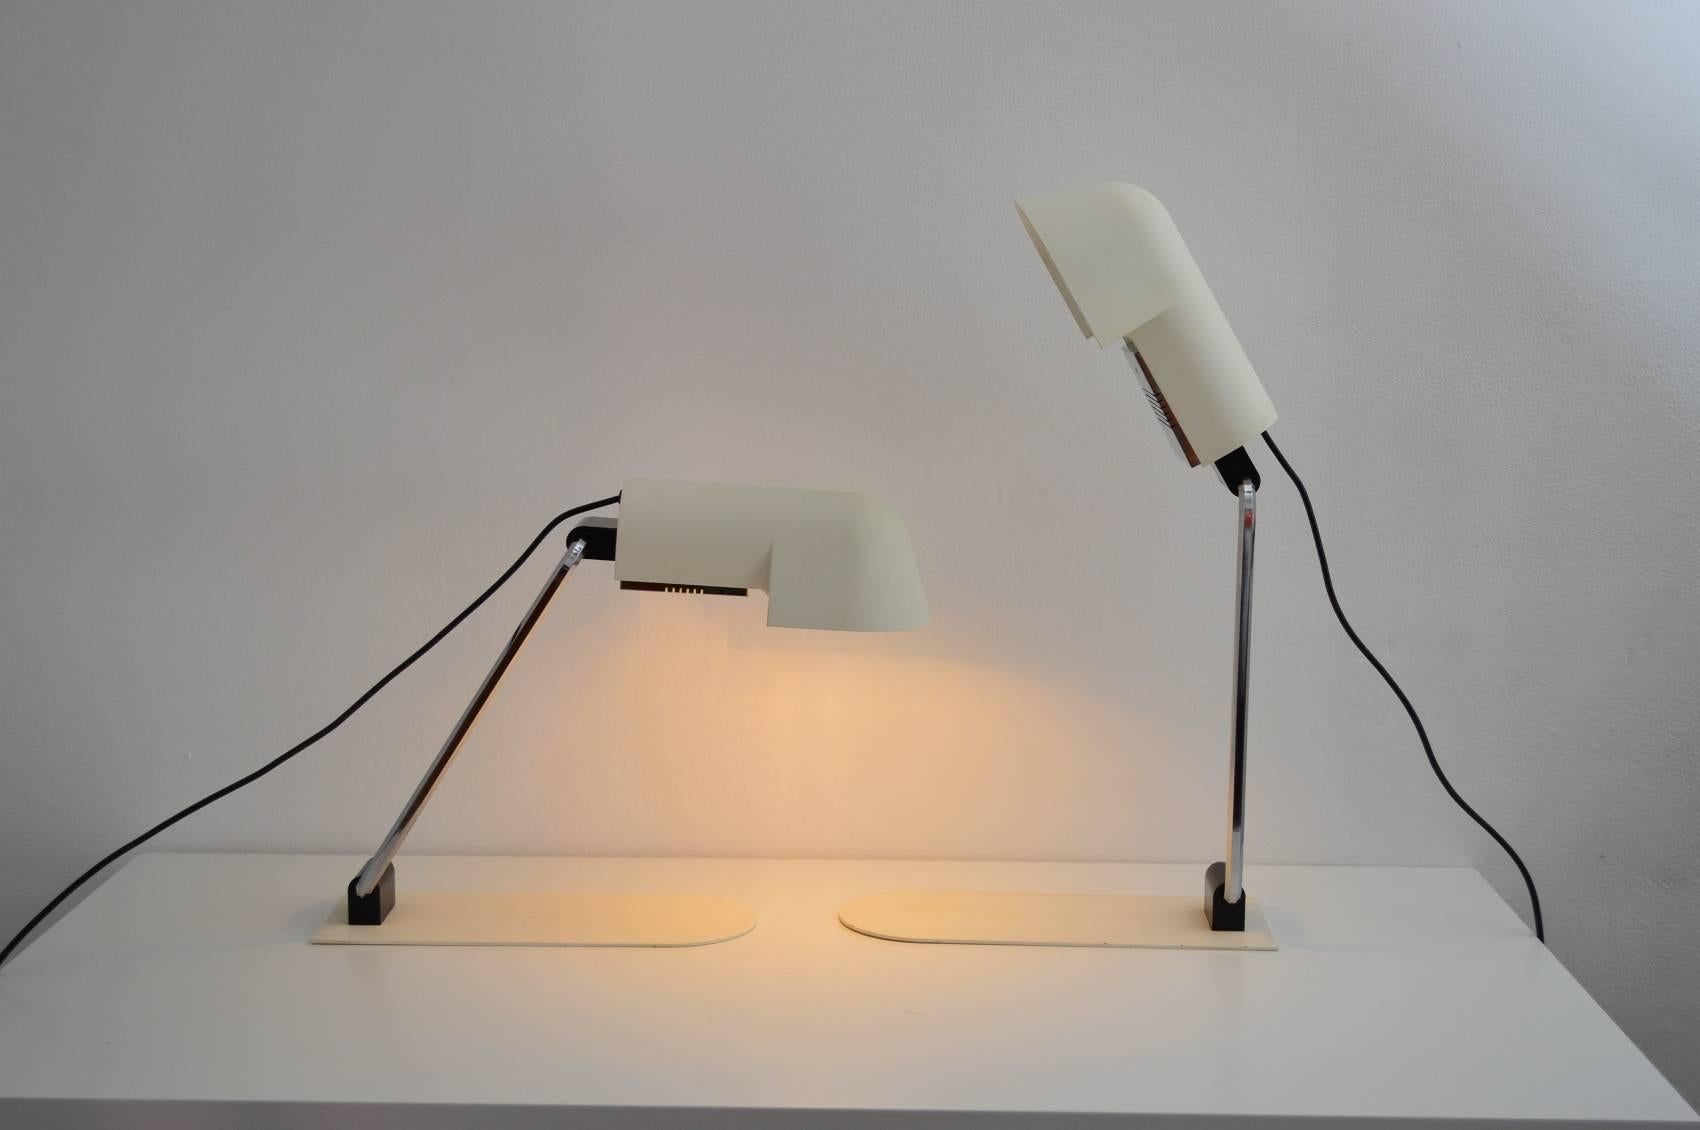 Aluminum Space Age Table Lamp or Desk Lamp by Danilo Aroldi for Luci, 1975, Set of Two